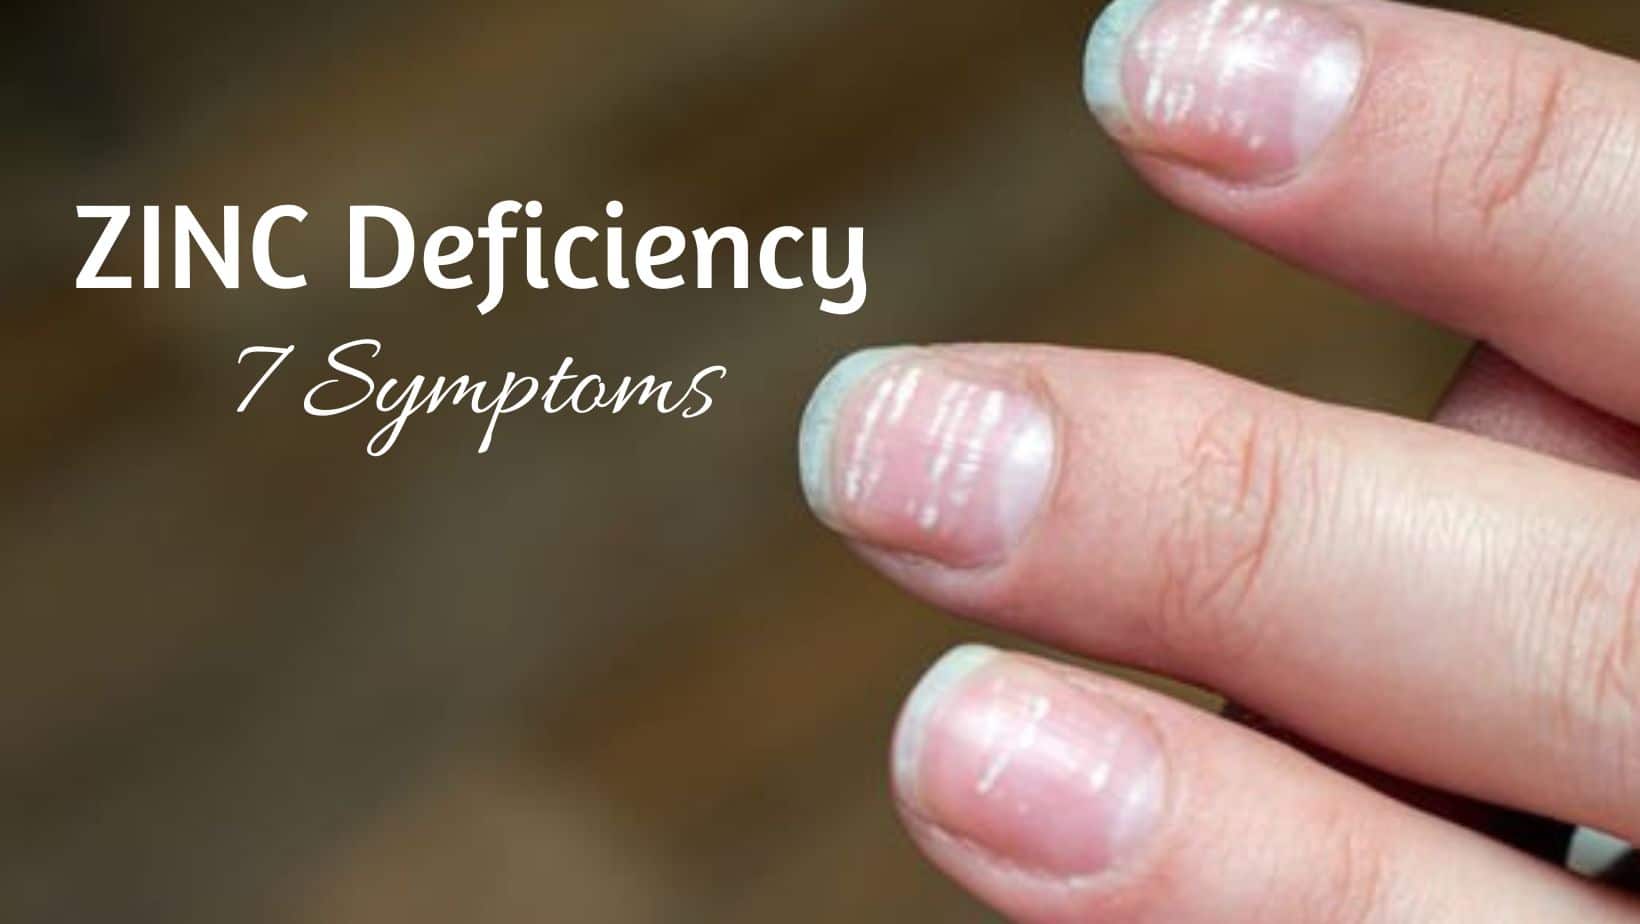 When Vitamin And Nutritional Deficiencies Cause Skin And Nail Changes